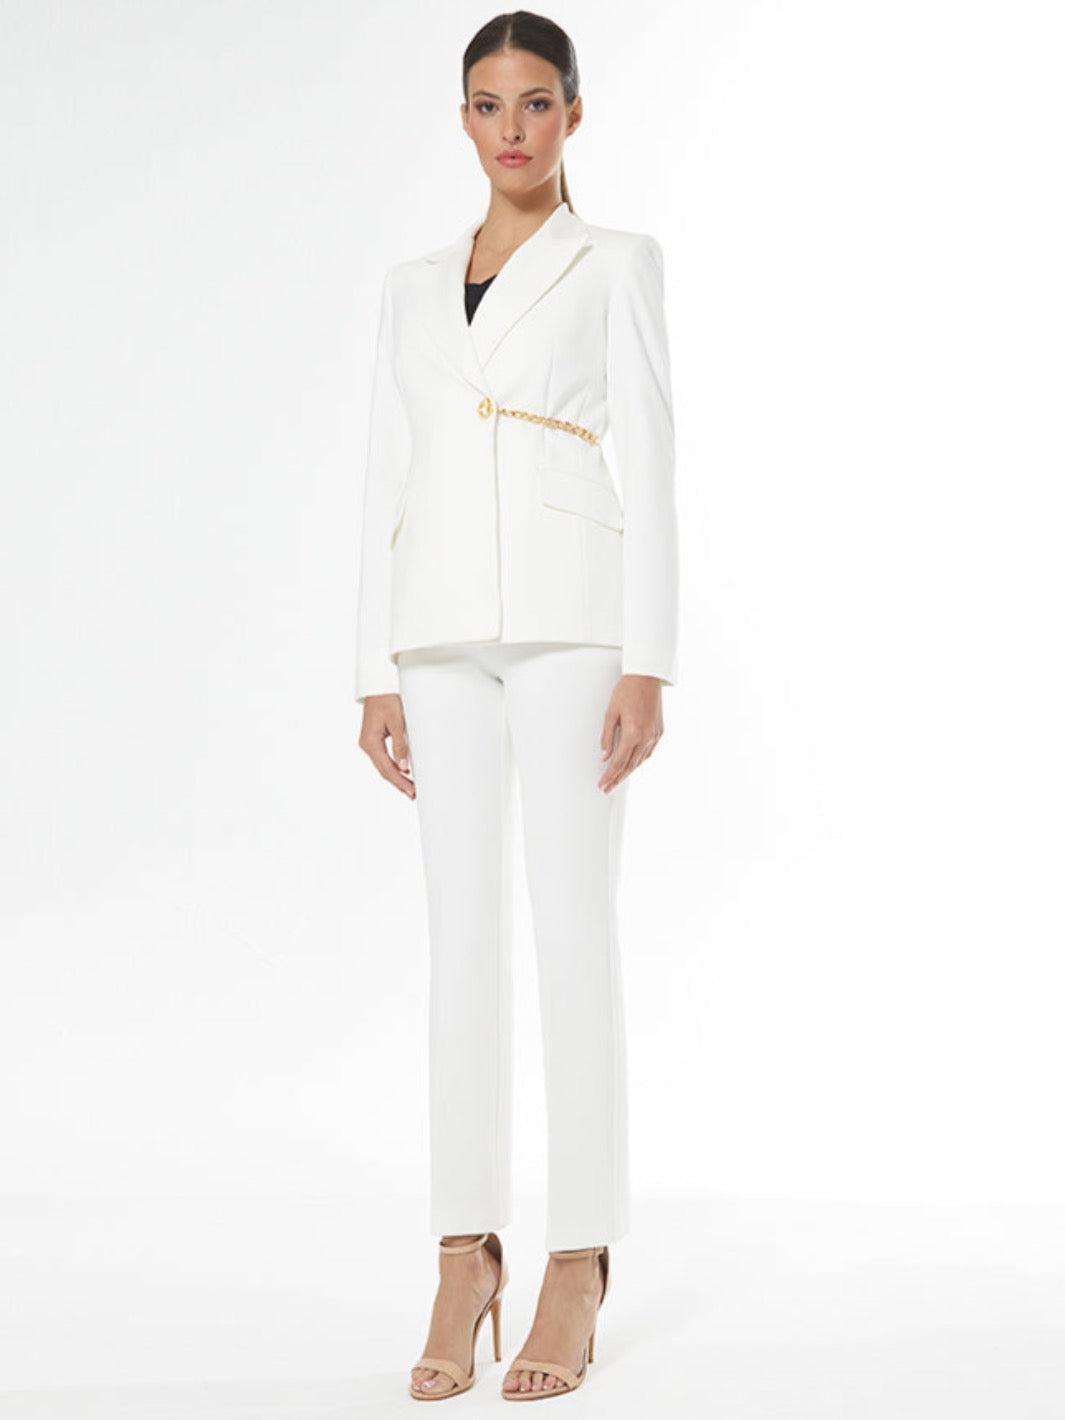 Carla Ruiz Suit 51029 - White-Occasion Wear-Guest of the wedding-Nicola Ross